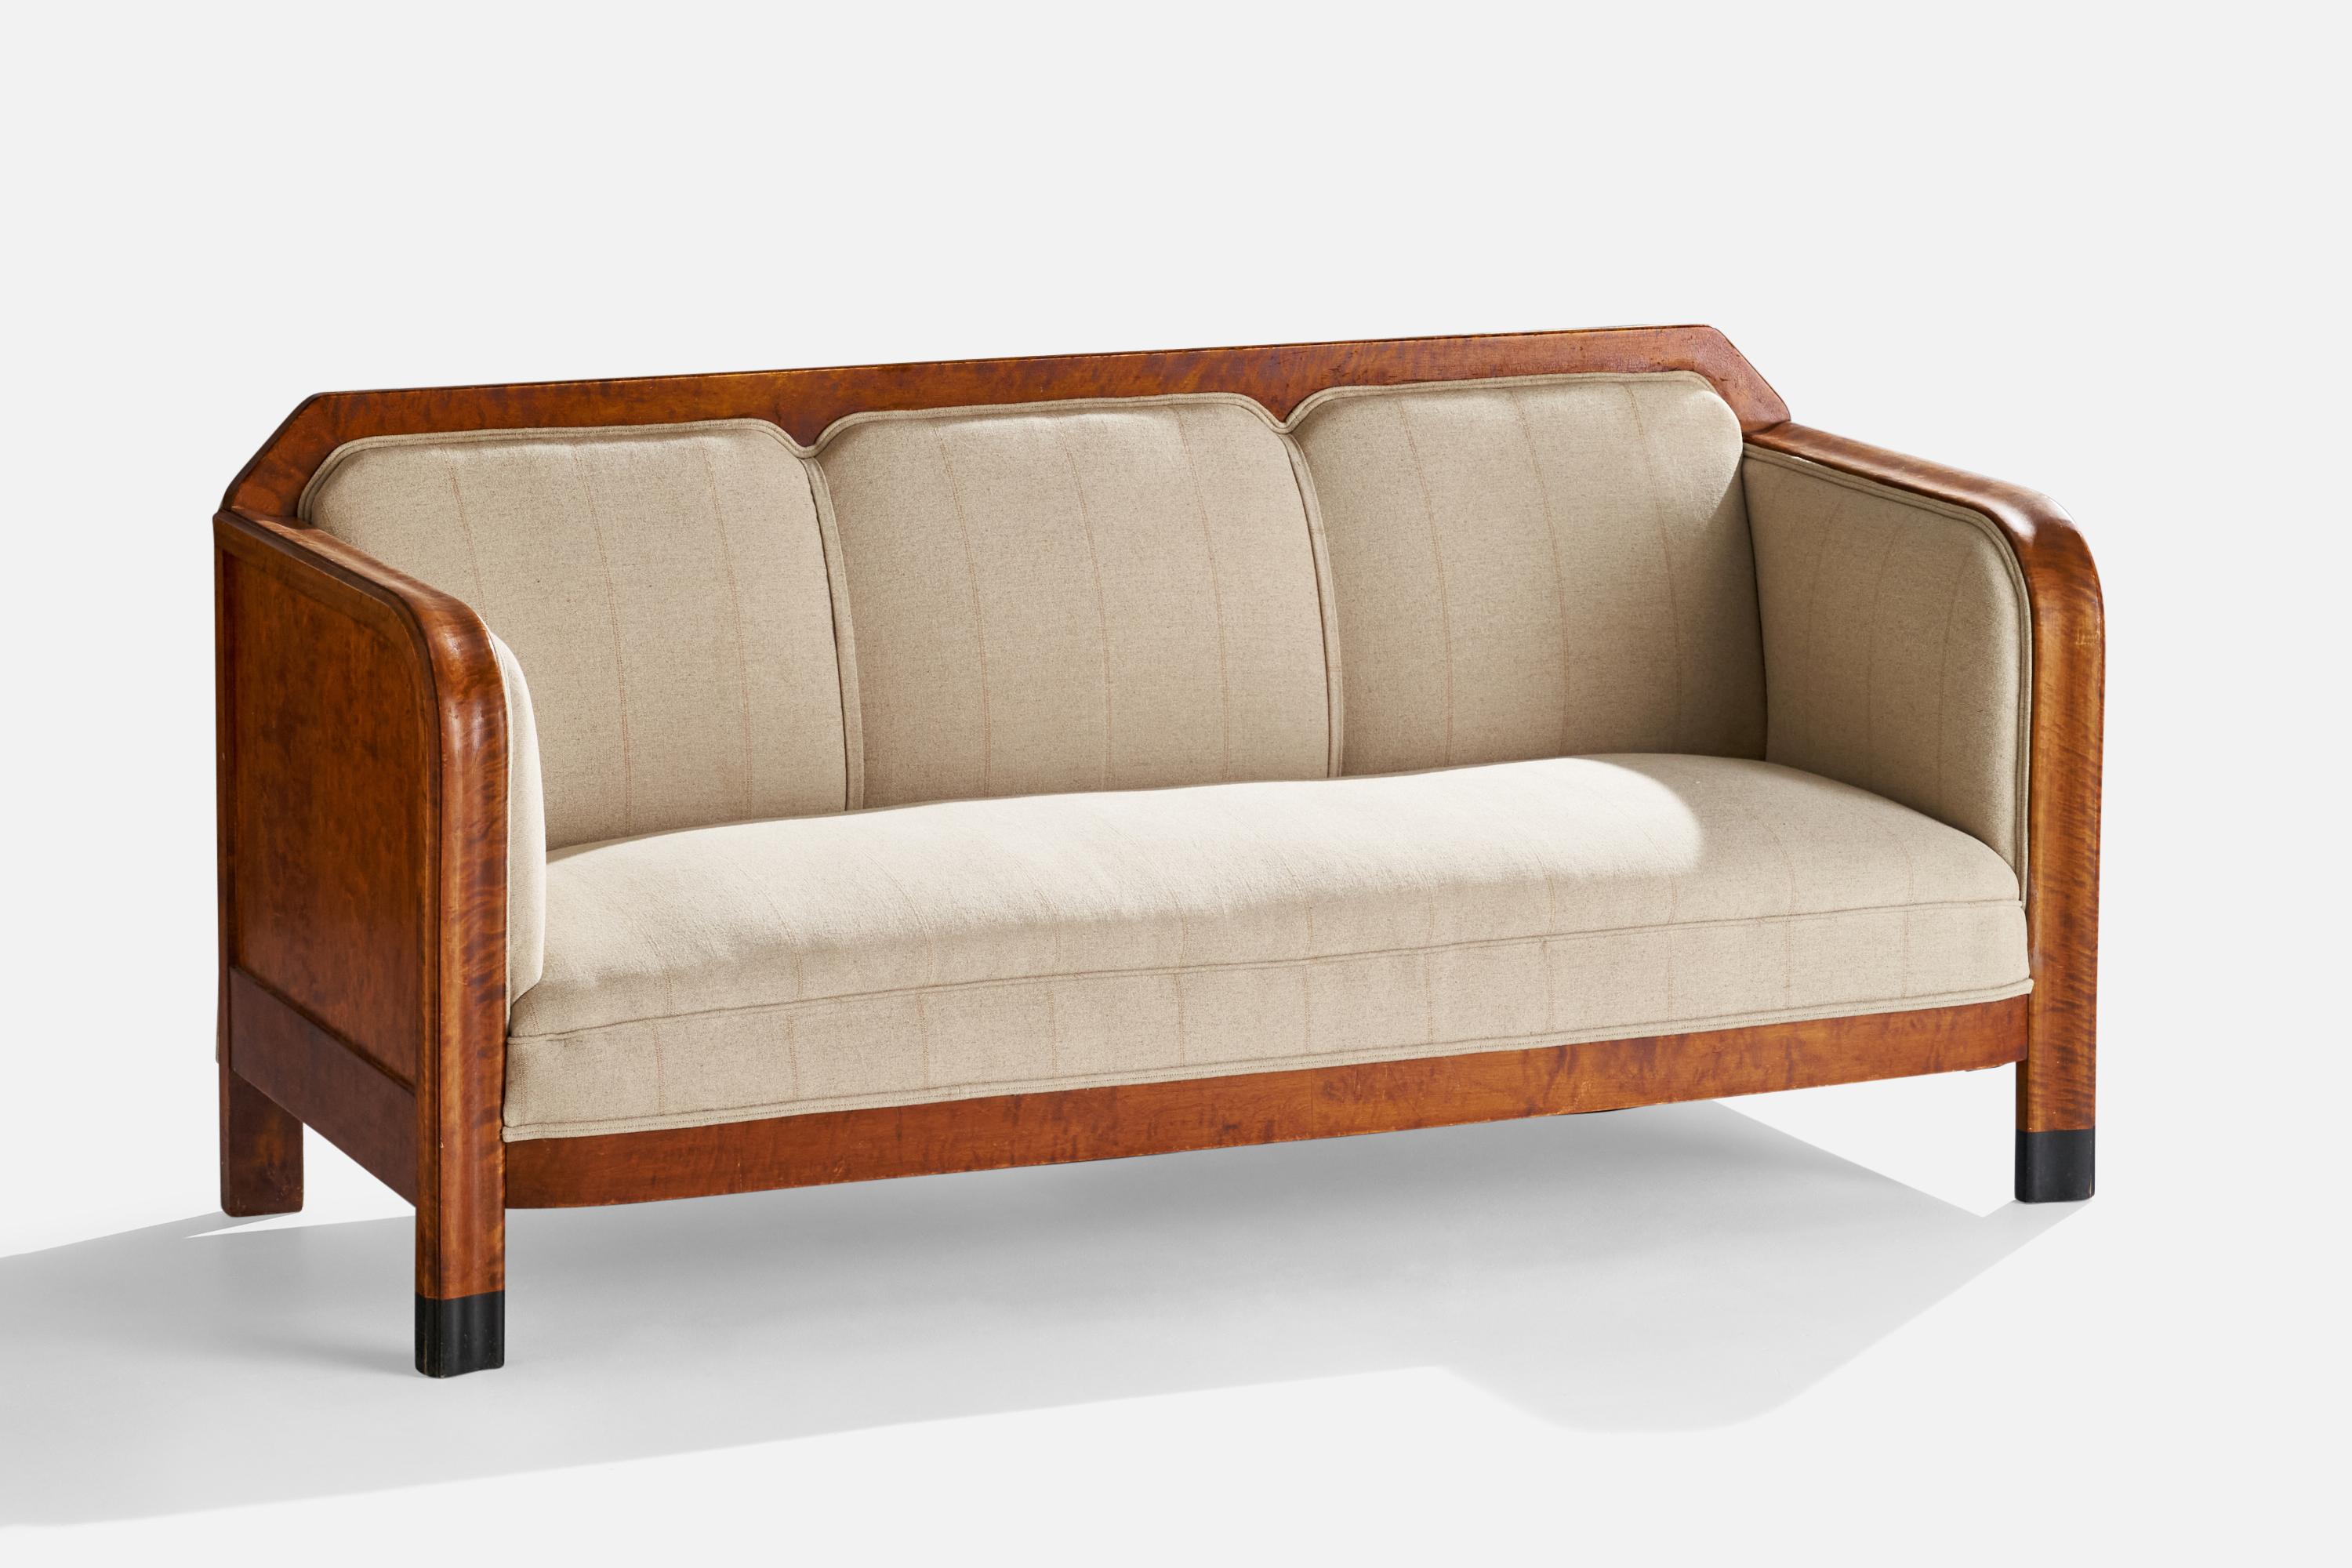 A birch and striped beige fabric sofa designed and produced in Sweden, c. 1920s.

Seat height: 16.5”